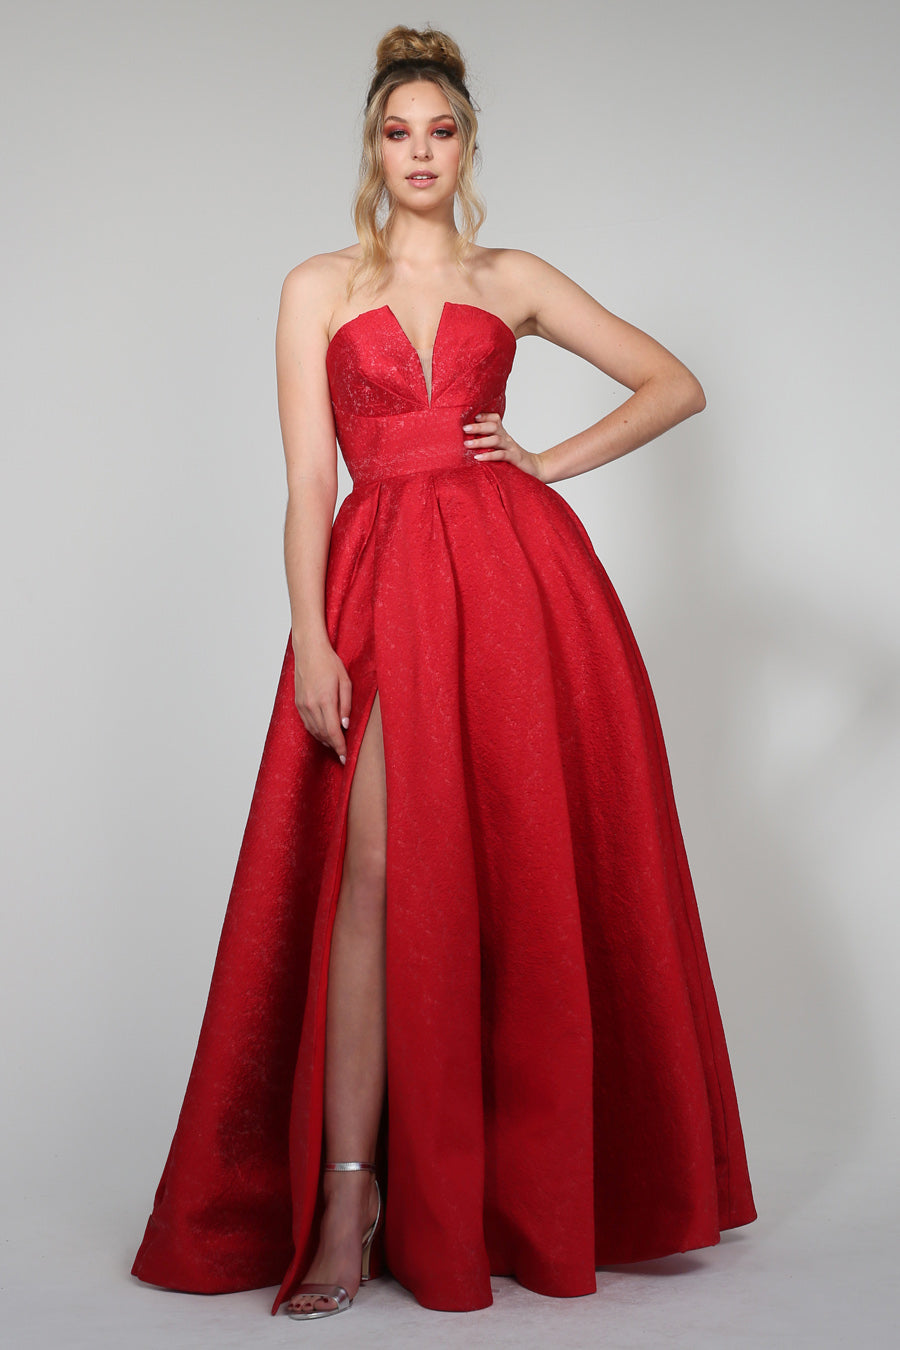 Tinaholy Couture TA611B Red Strapless Ball Gown Formal Dress {vendor} AfterPay Humm ZipPay LayBuy Sezzle